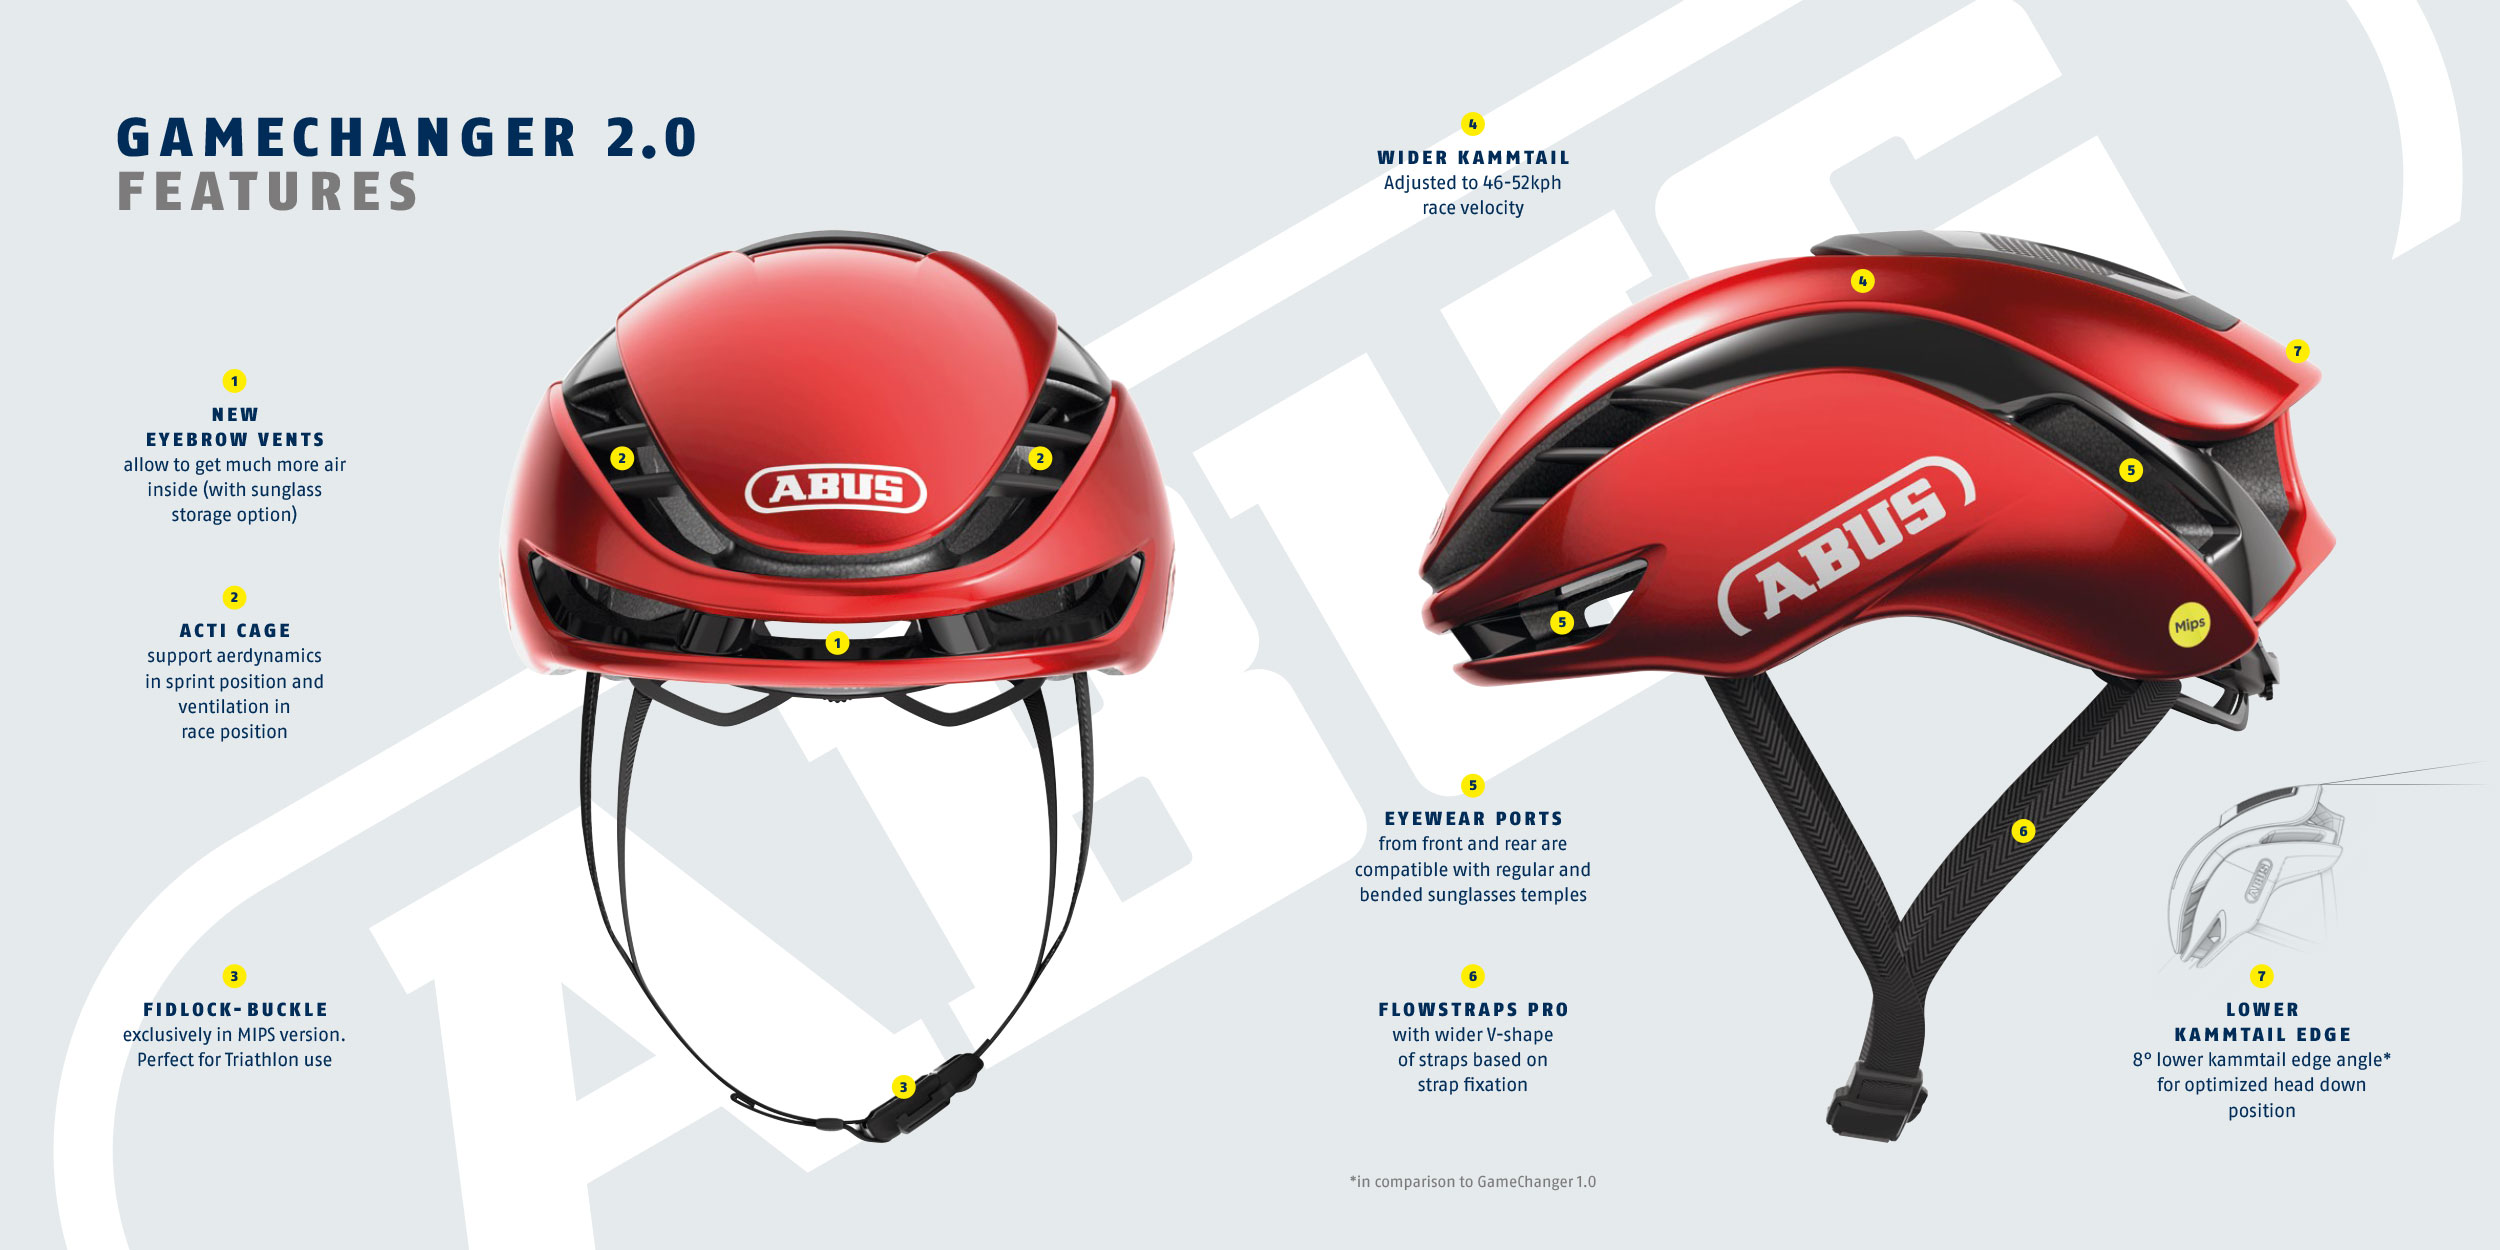 Abus Gamechanger 2.0 - Made in Italy